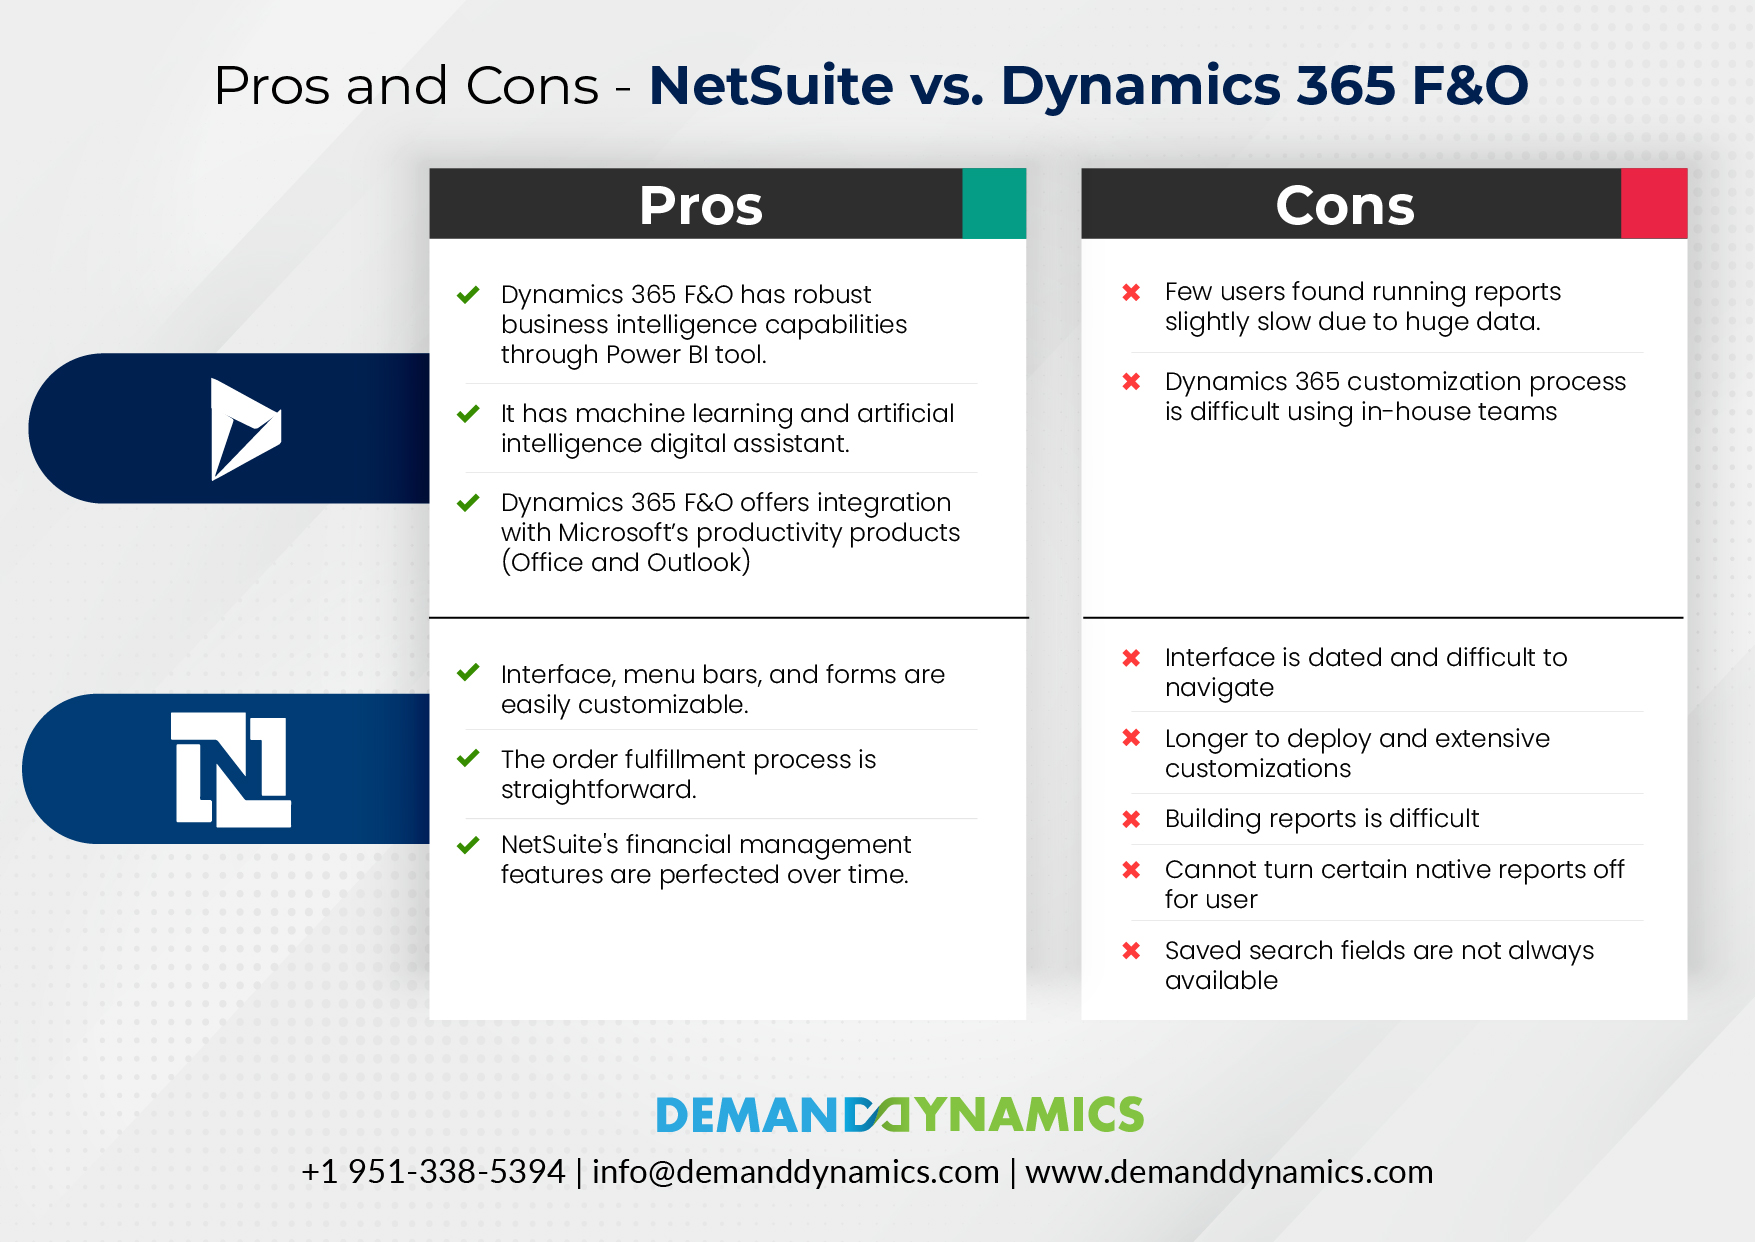 Pros and Cons - NetSuite vs. Dynamics 365 F&O